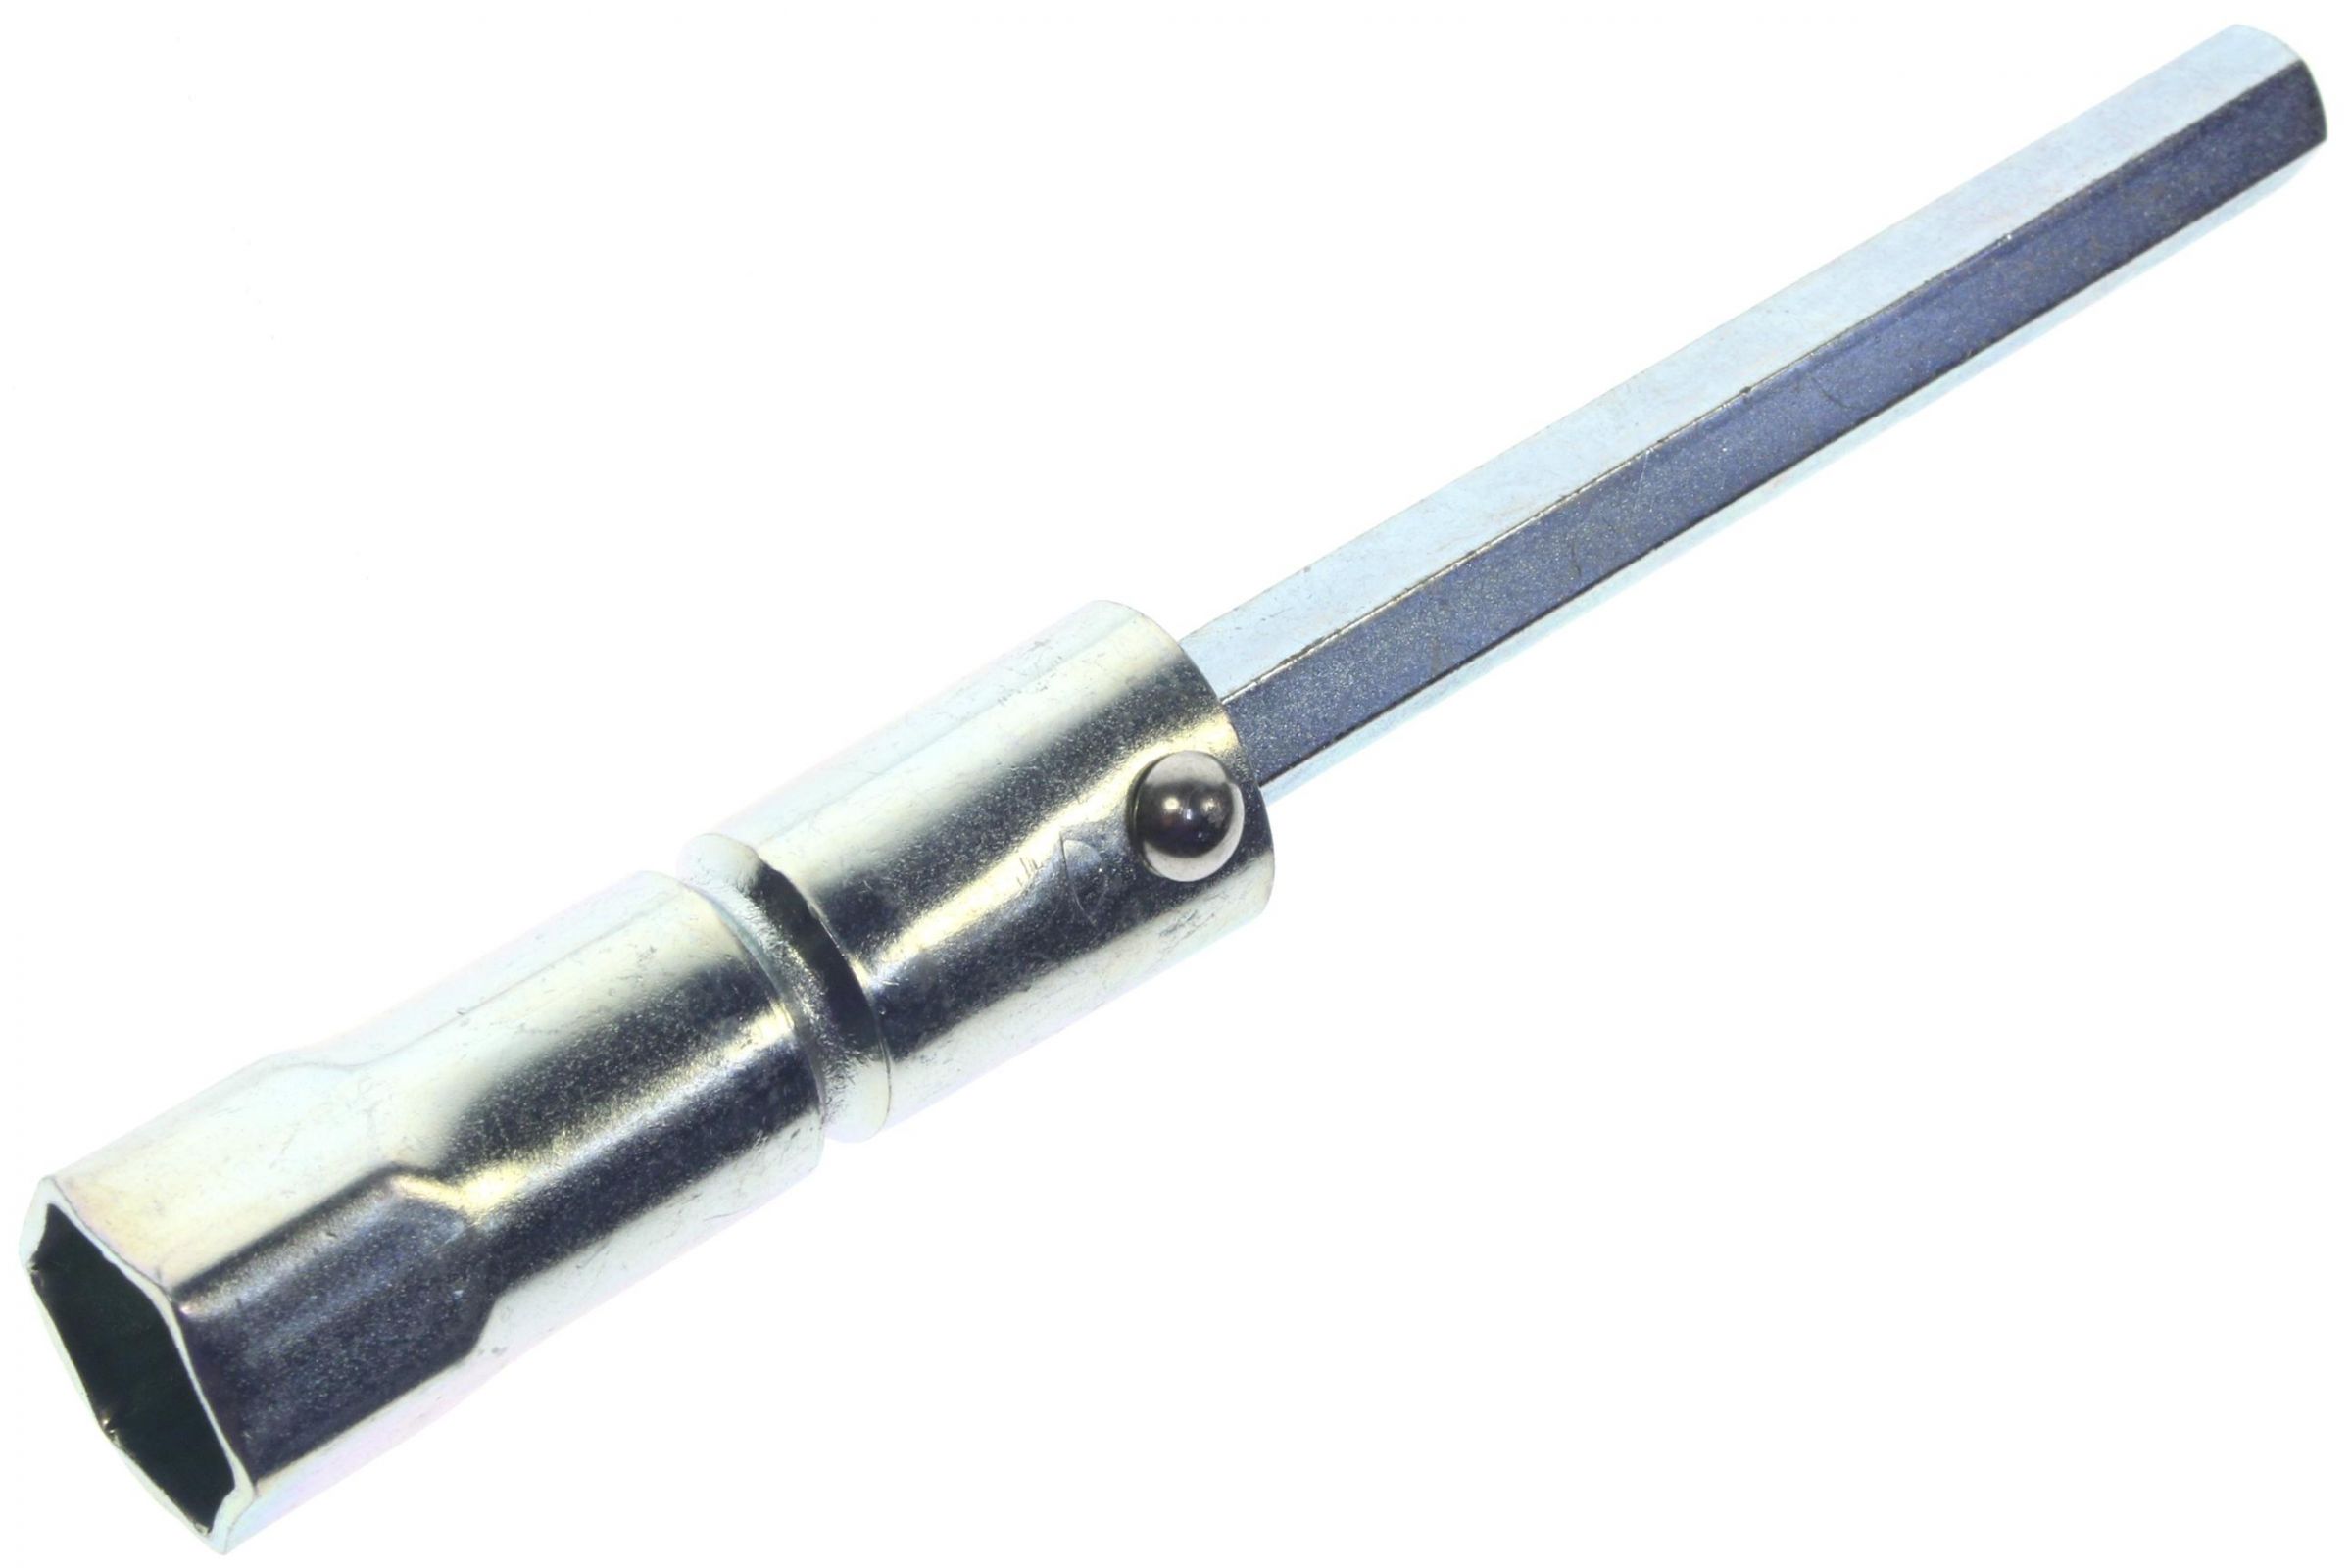 89216-MCW-D00 SPARK PLUG WRENCH